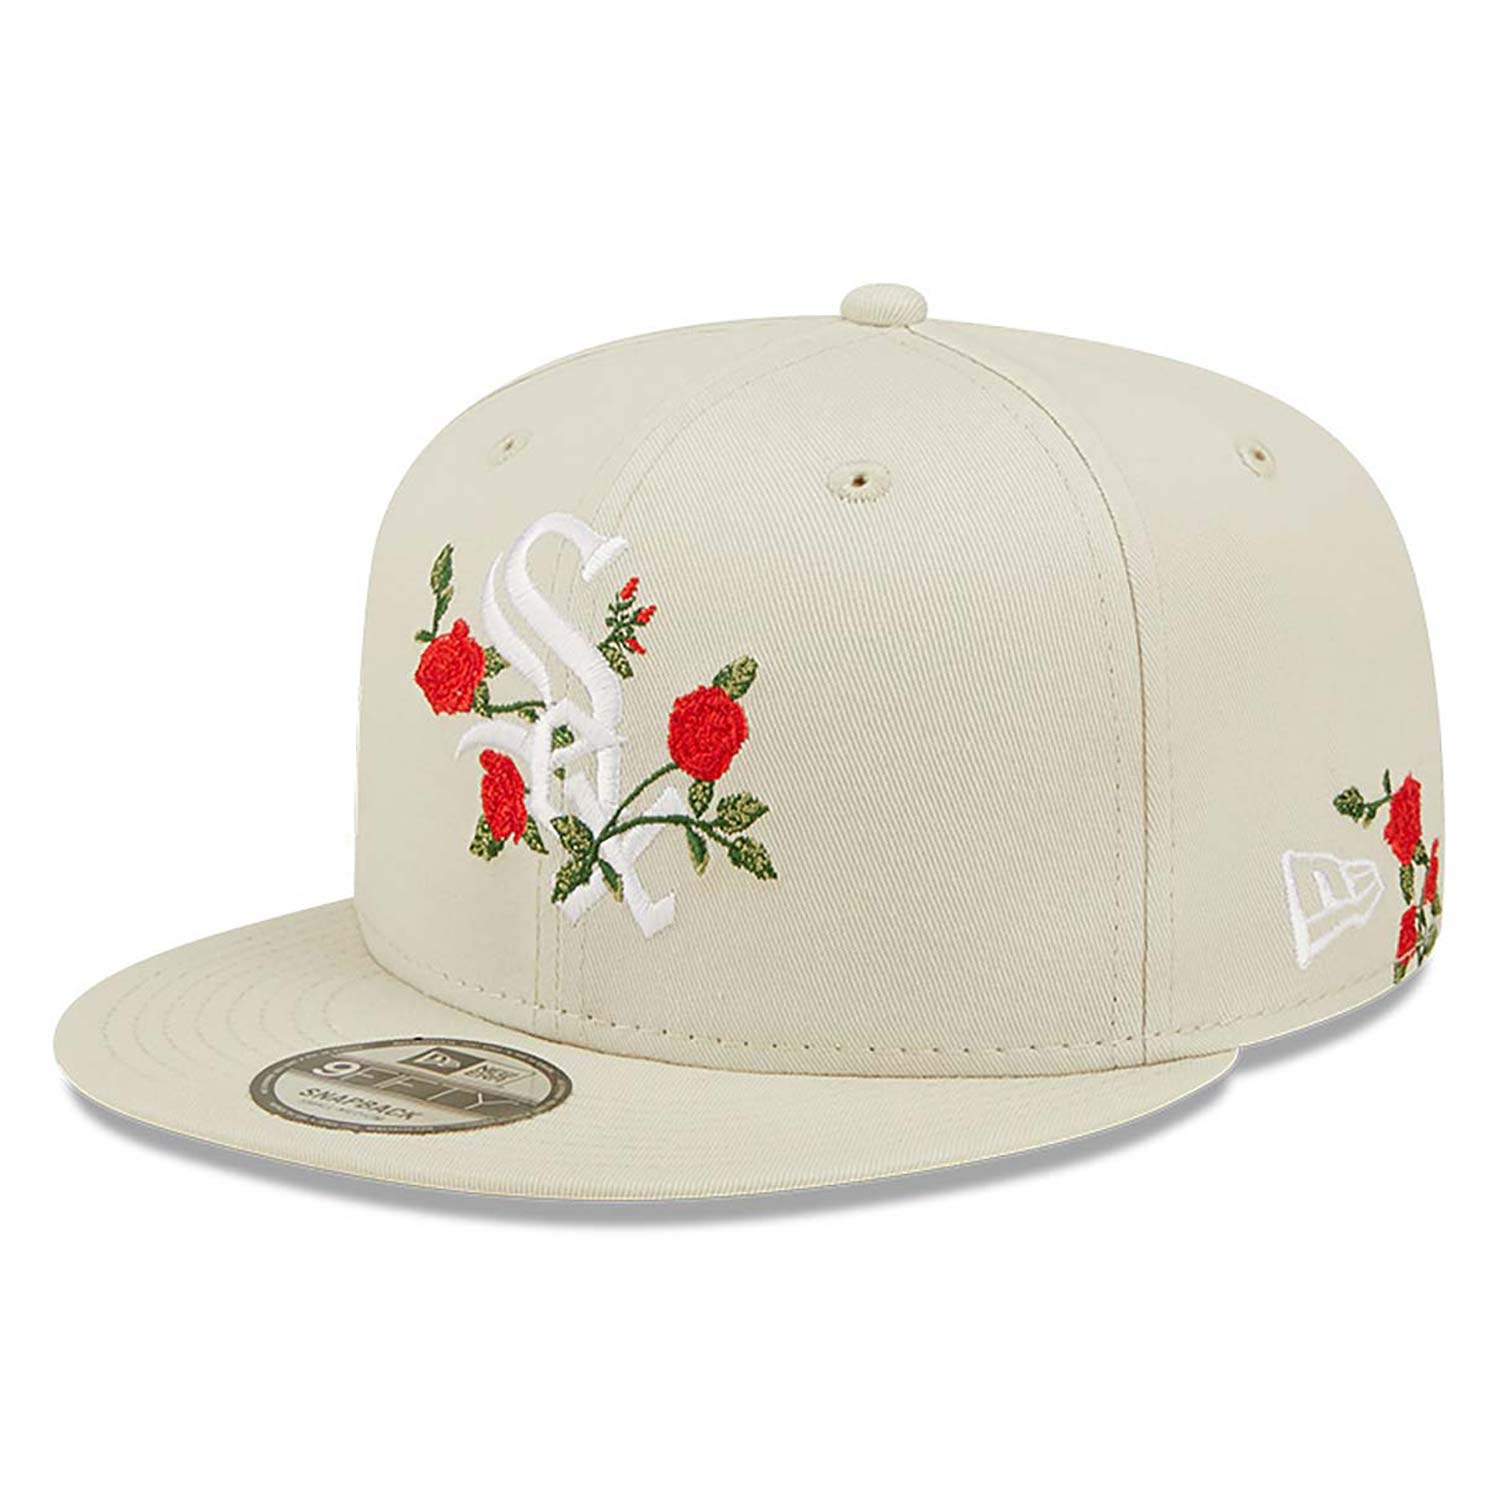 Chicago White Sox Flower Stone 9FIFTY Snapback Cap